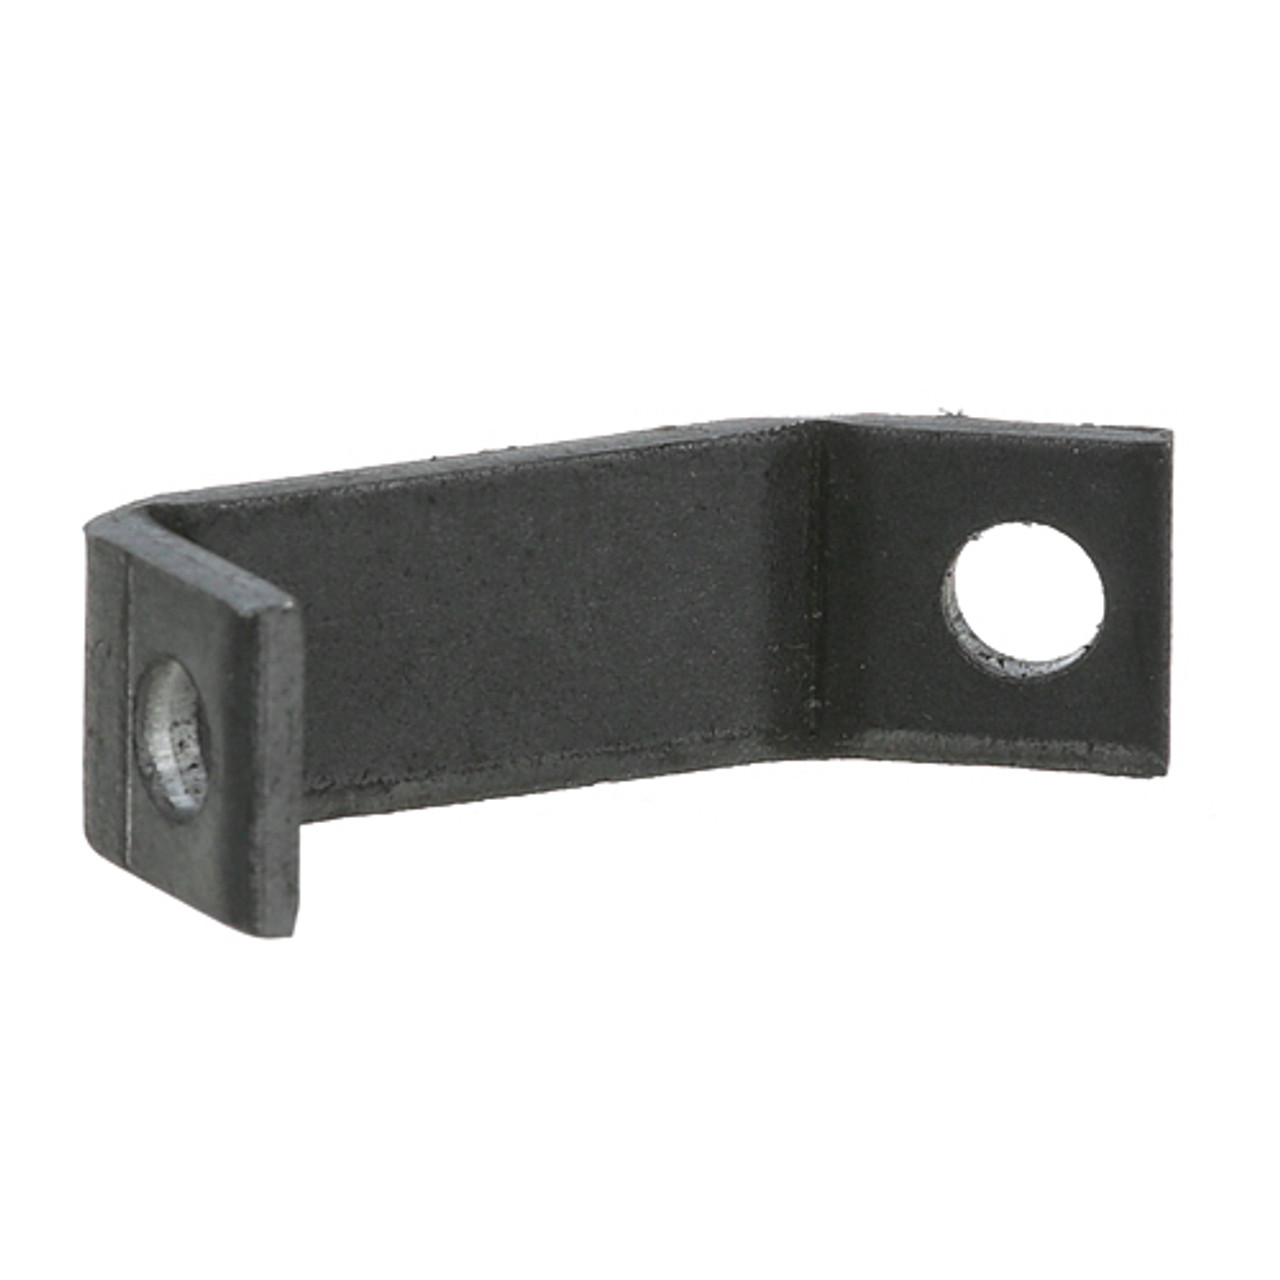 Bracket - Replacement Part For Hobart 00-417367-00001